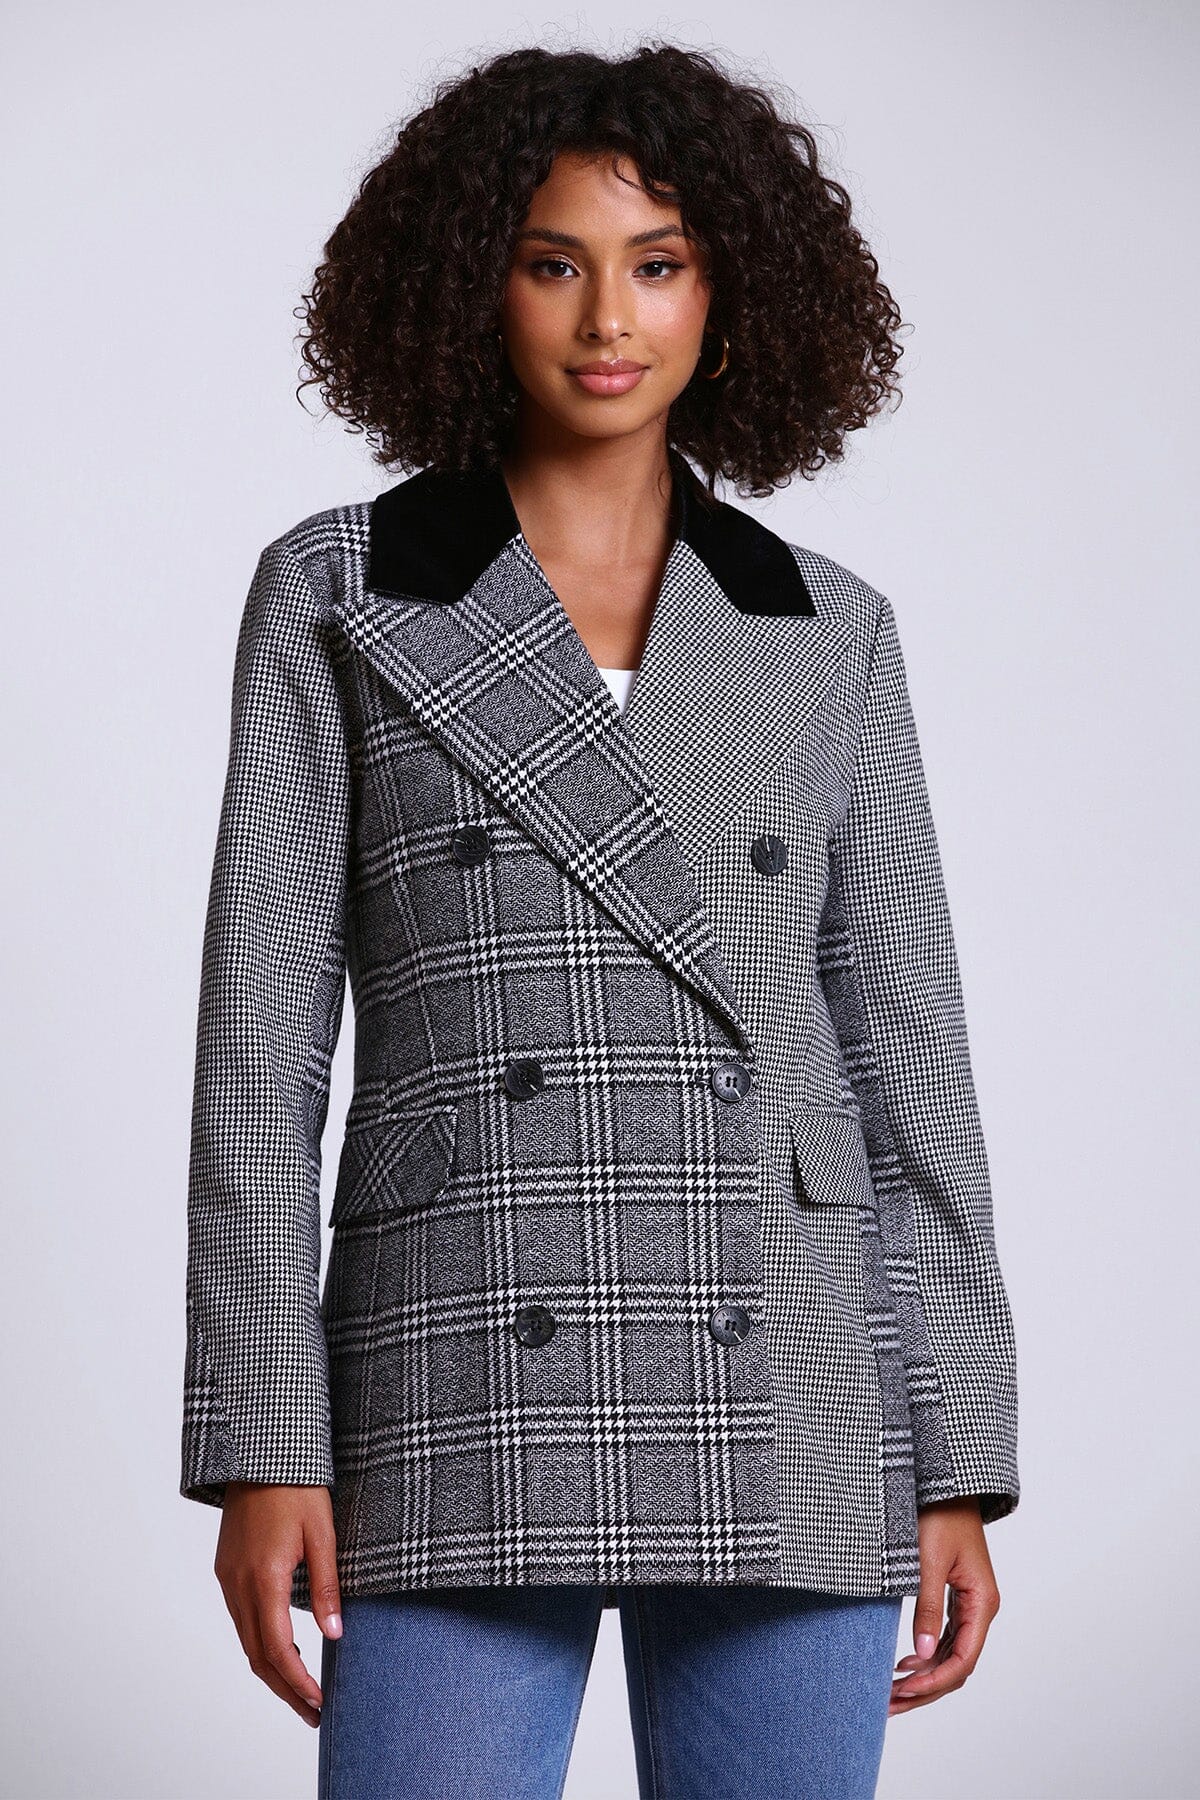 houndstooth mixed media plaid double breasted blazer coat jacket - women's figure flattering work appropriate blazers outerwear